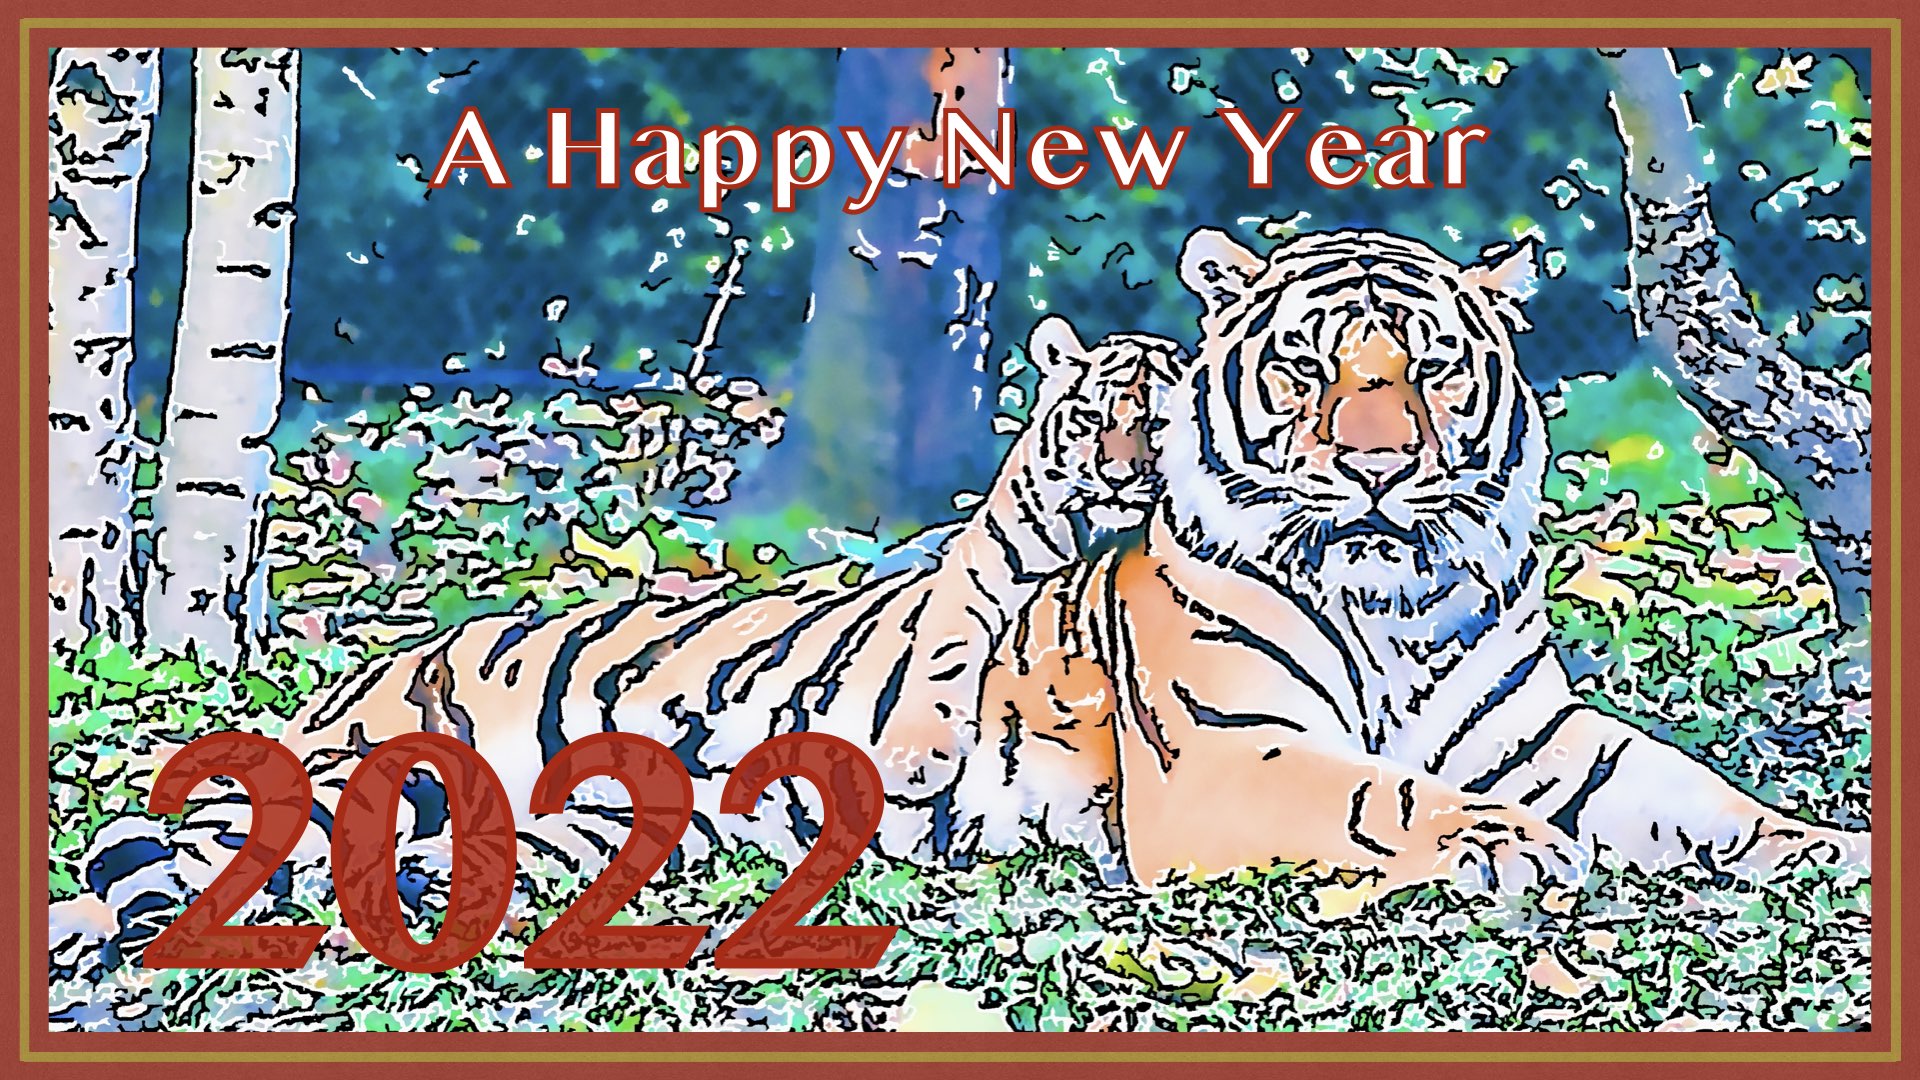 A Happy New Year!! 2022